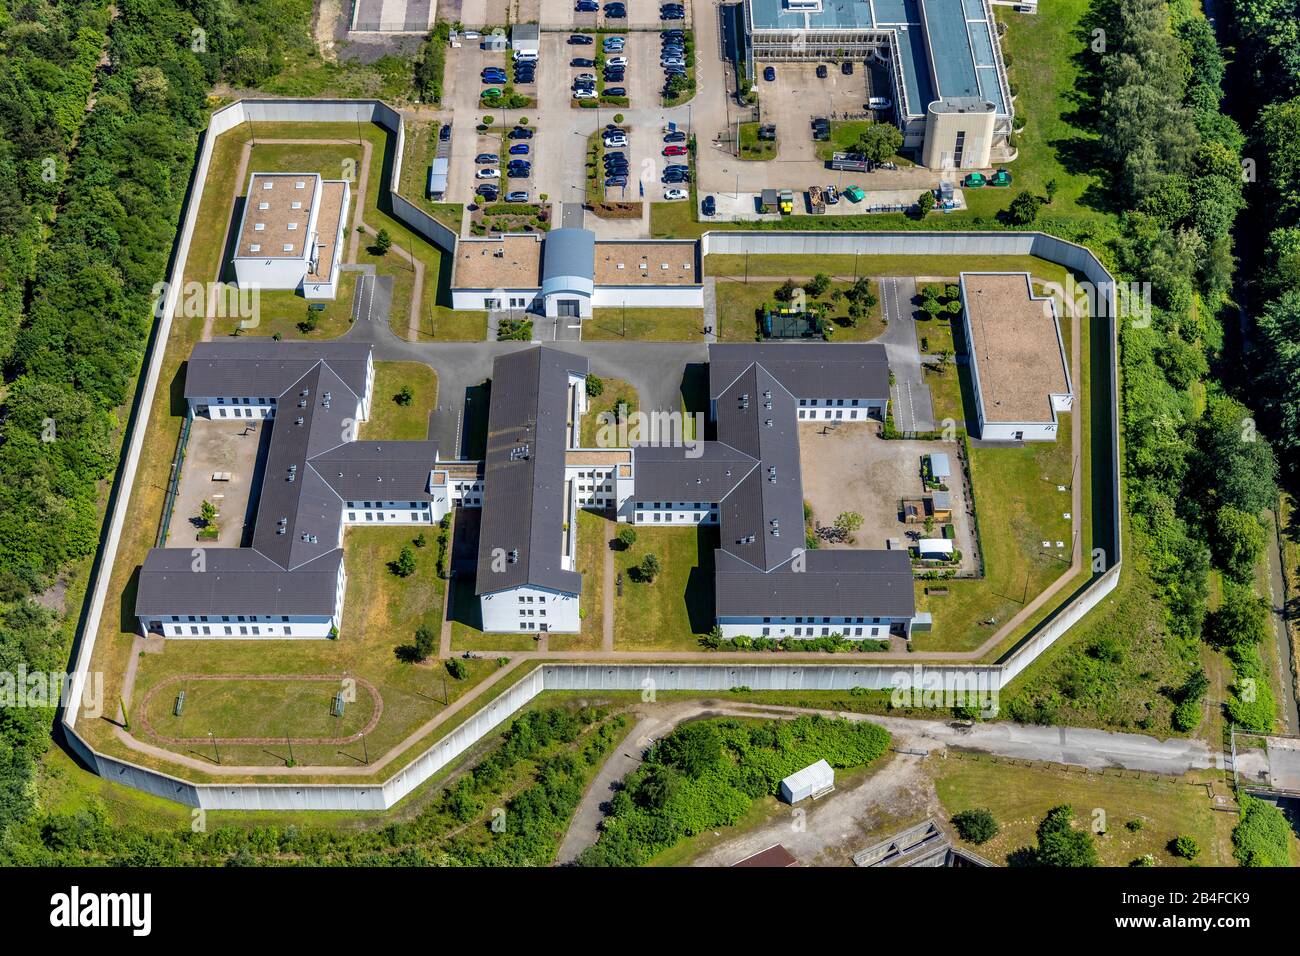 Aerial view of Forensics LWL-Massrehvollzugsklinik Herne Modern specialist clinic for therapy and safety, Haverkamp, Herne, Ruhrgebiet, North Rhine-Westphalia, Germany Stock Photo